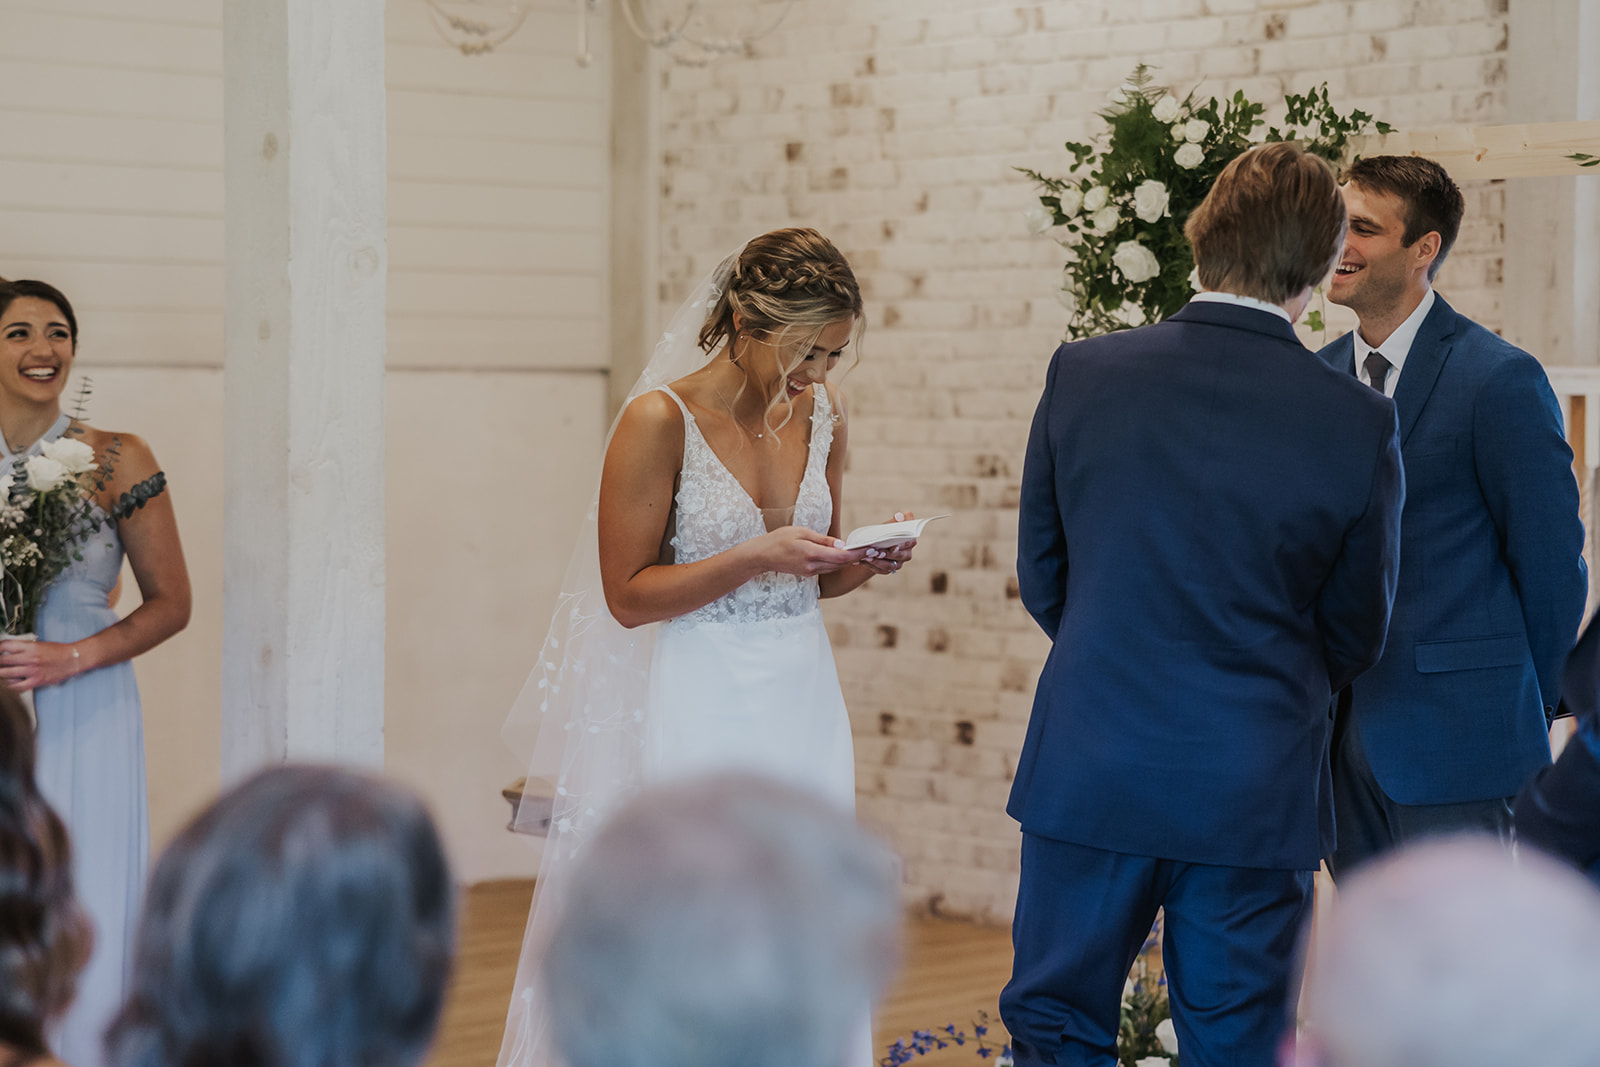 Stunning bride and groom share their vows during their dreamy Georgia wedding day